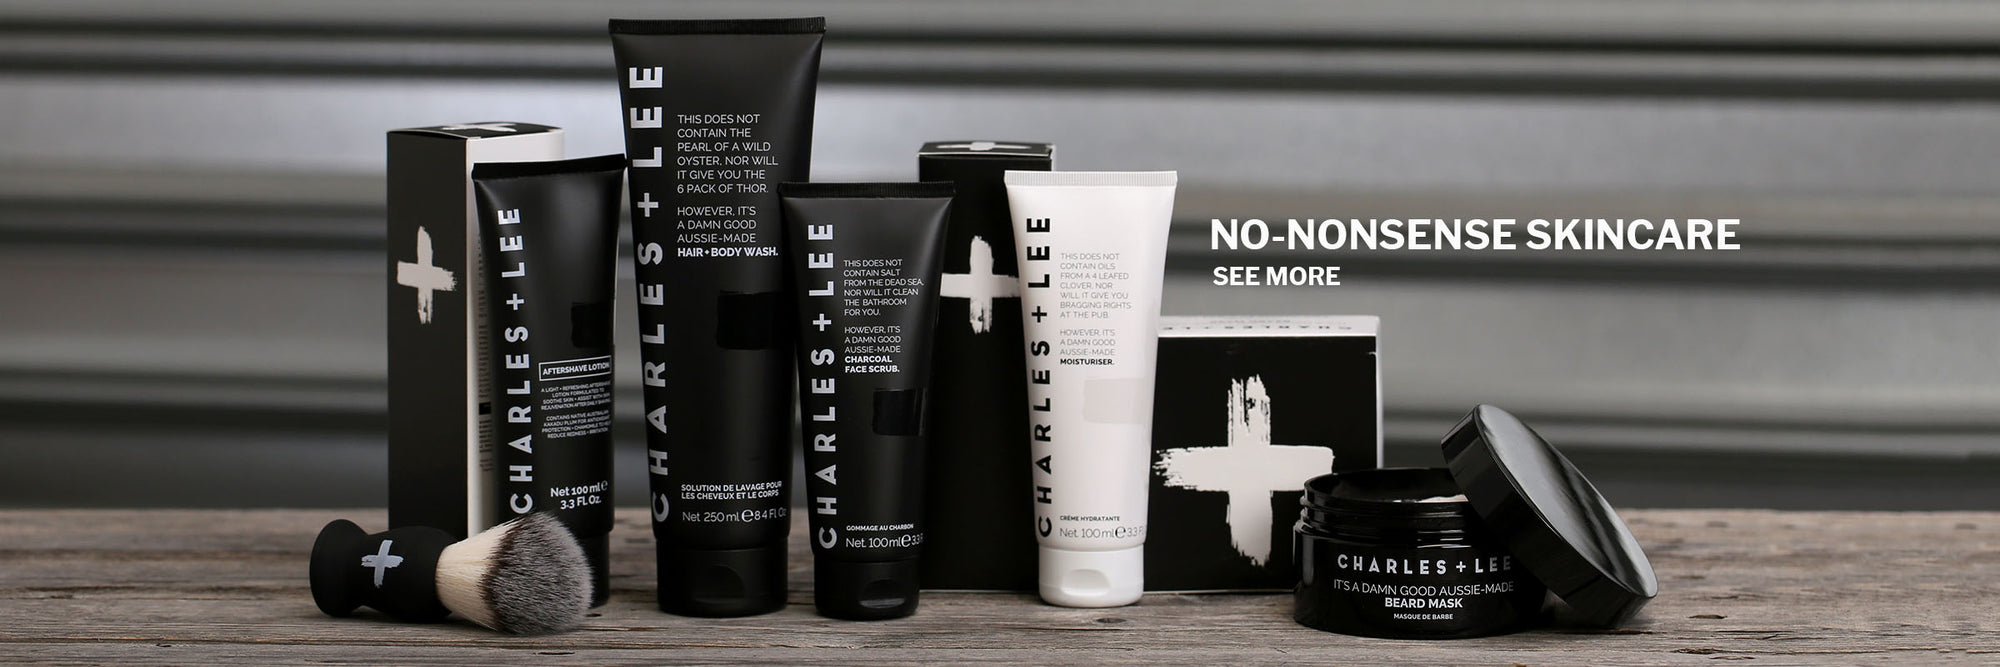 Charles and Lee no nonsense skincare products for men on a timber tabletop